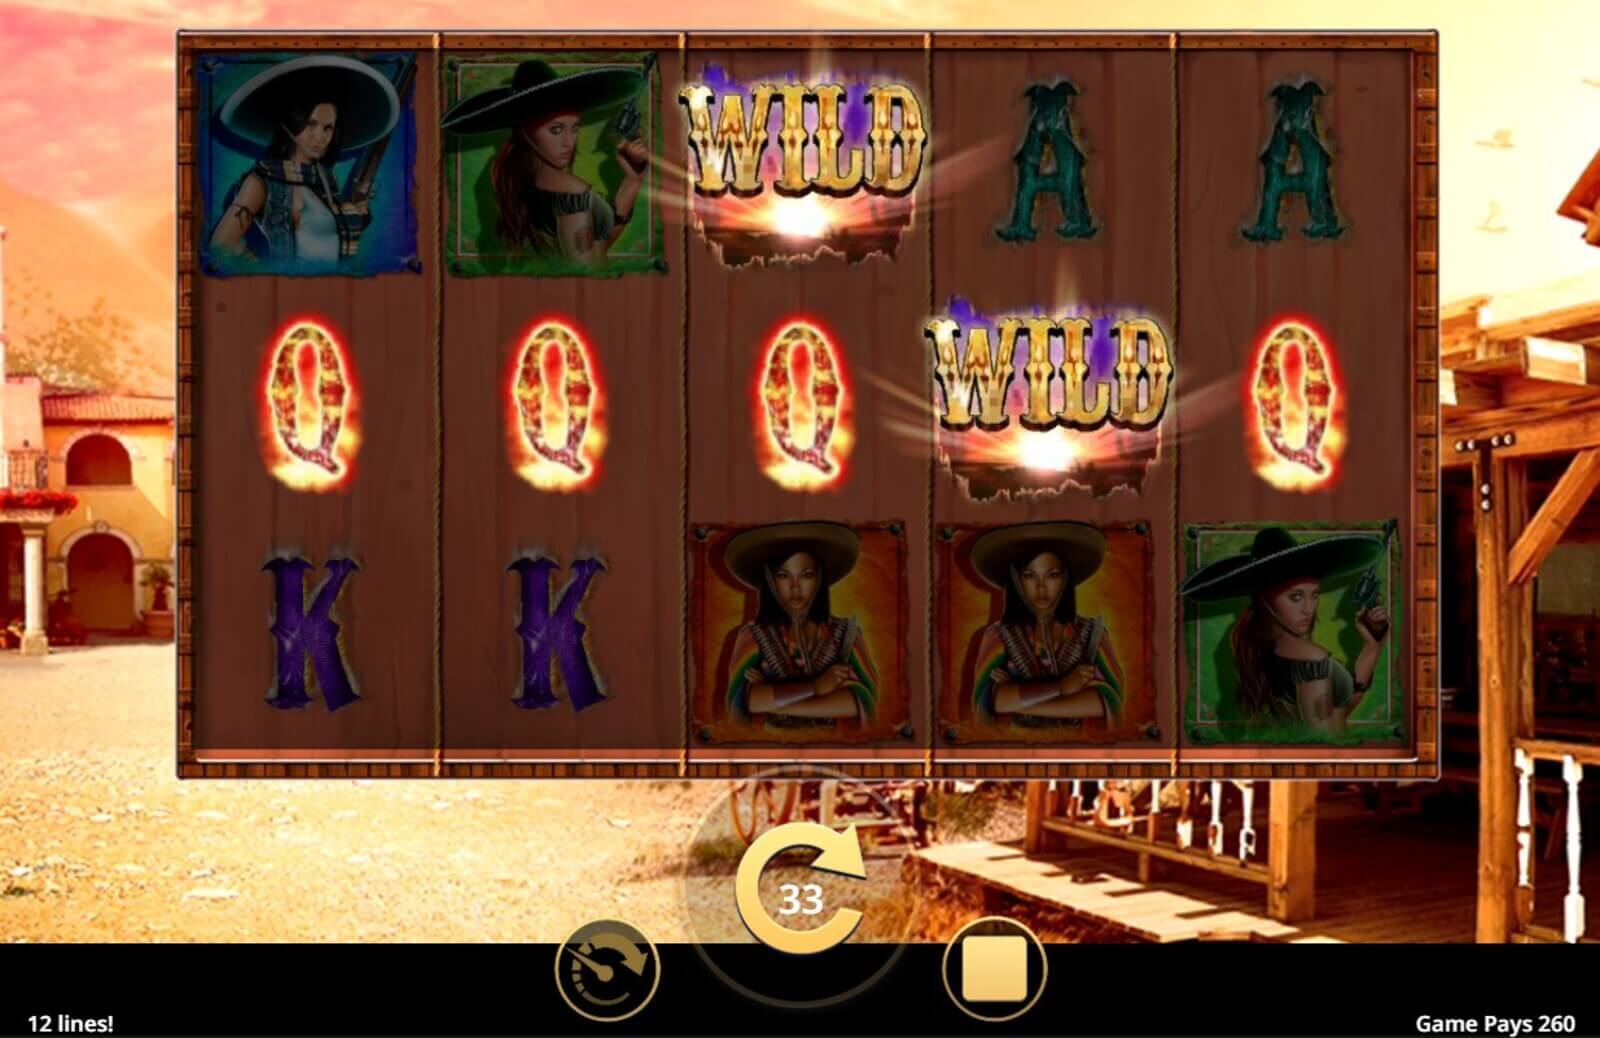 The Lovely Outlaws slot